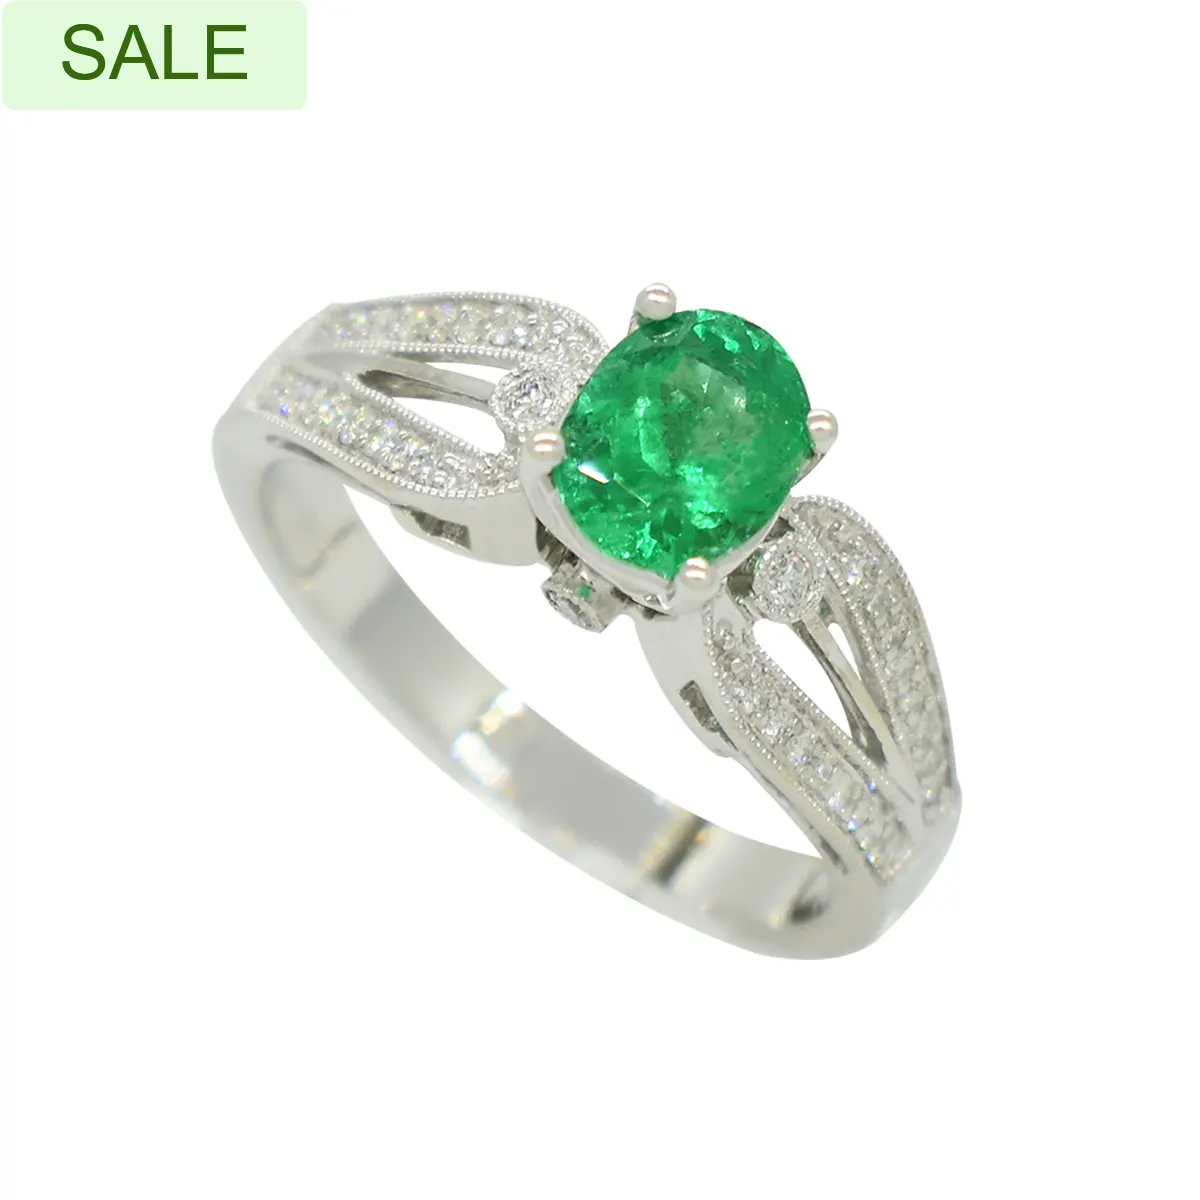 Emerald Ring in White Gold With Diamond Accents in Micro Pave